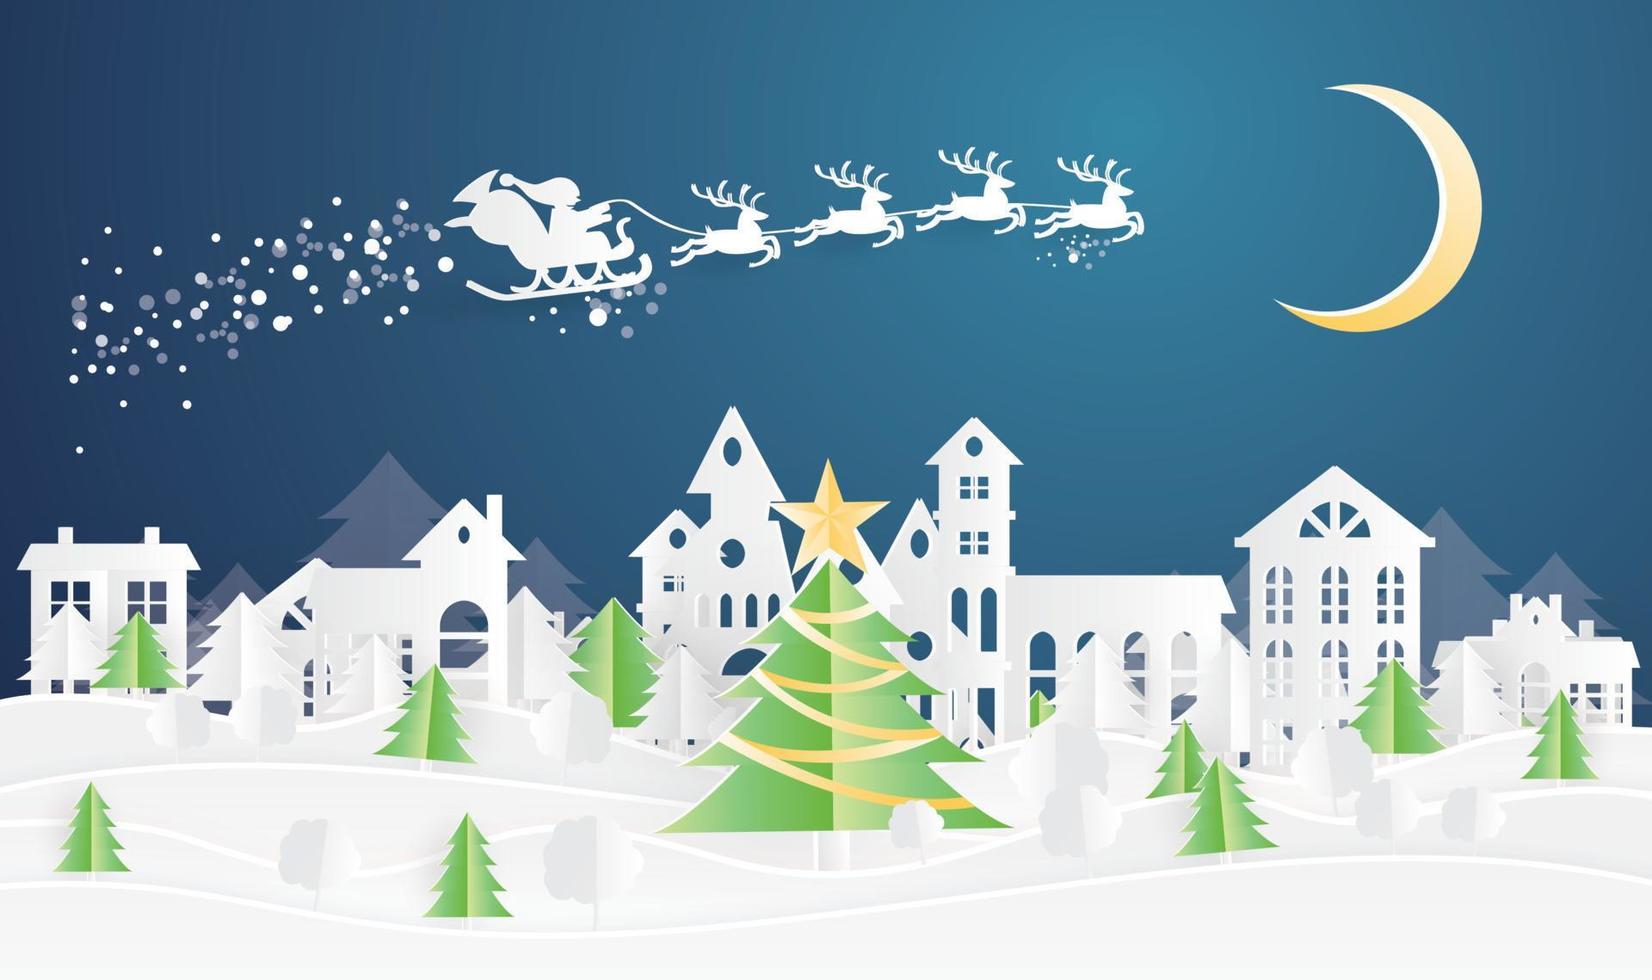 Christmas Village and Santa Claus in Sleigh in Paper Cut Style. vector